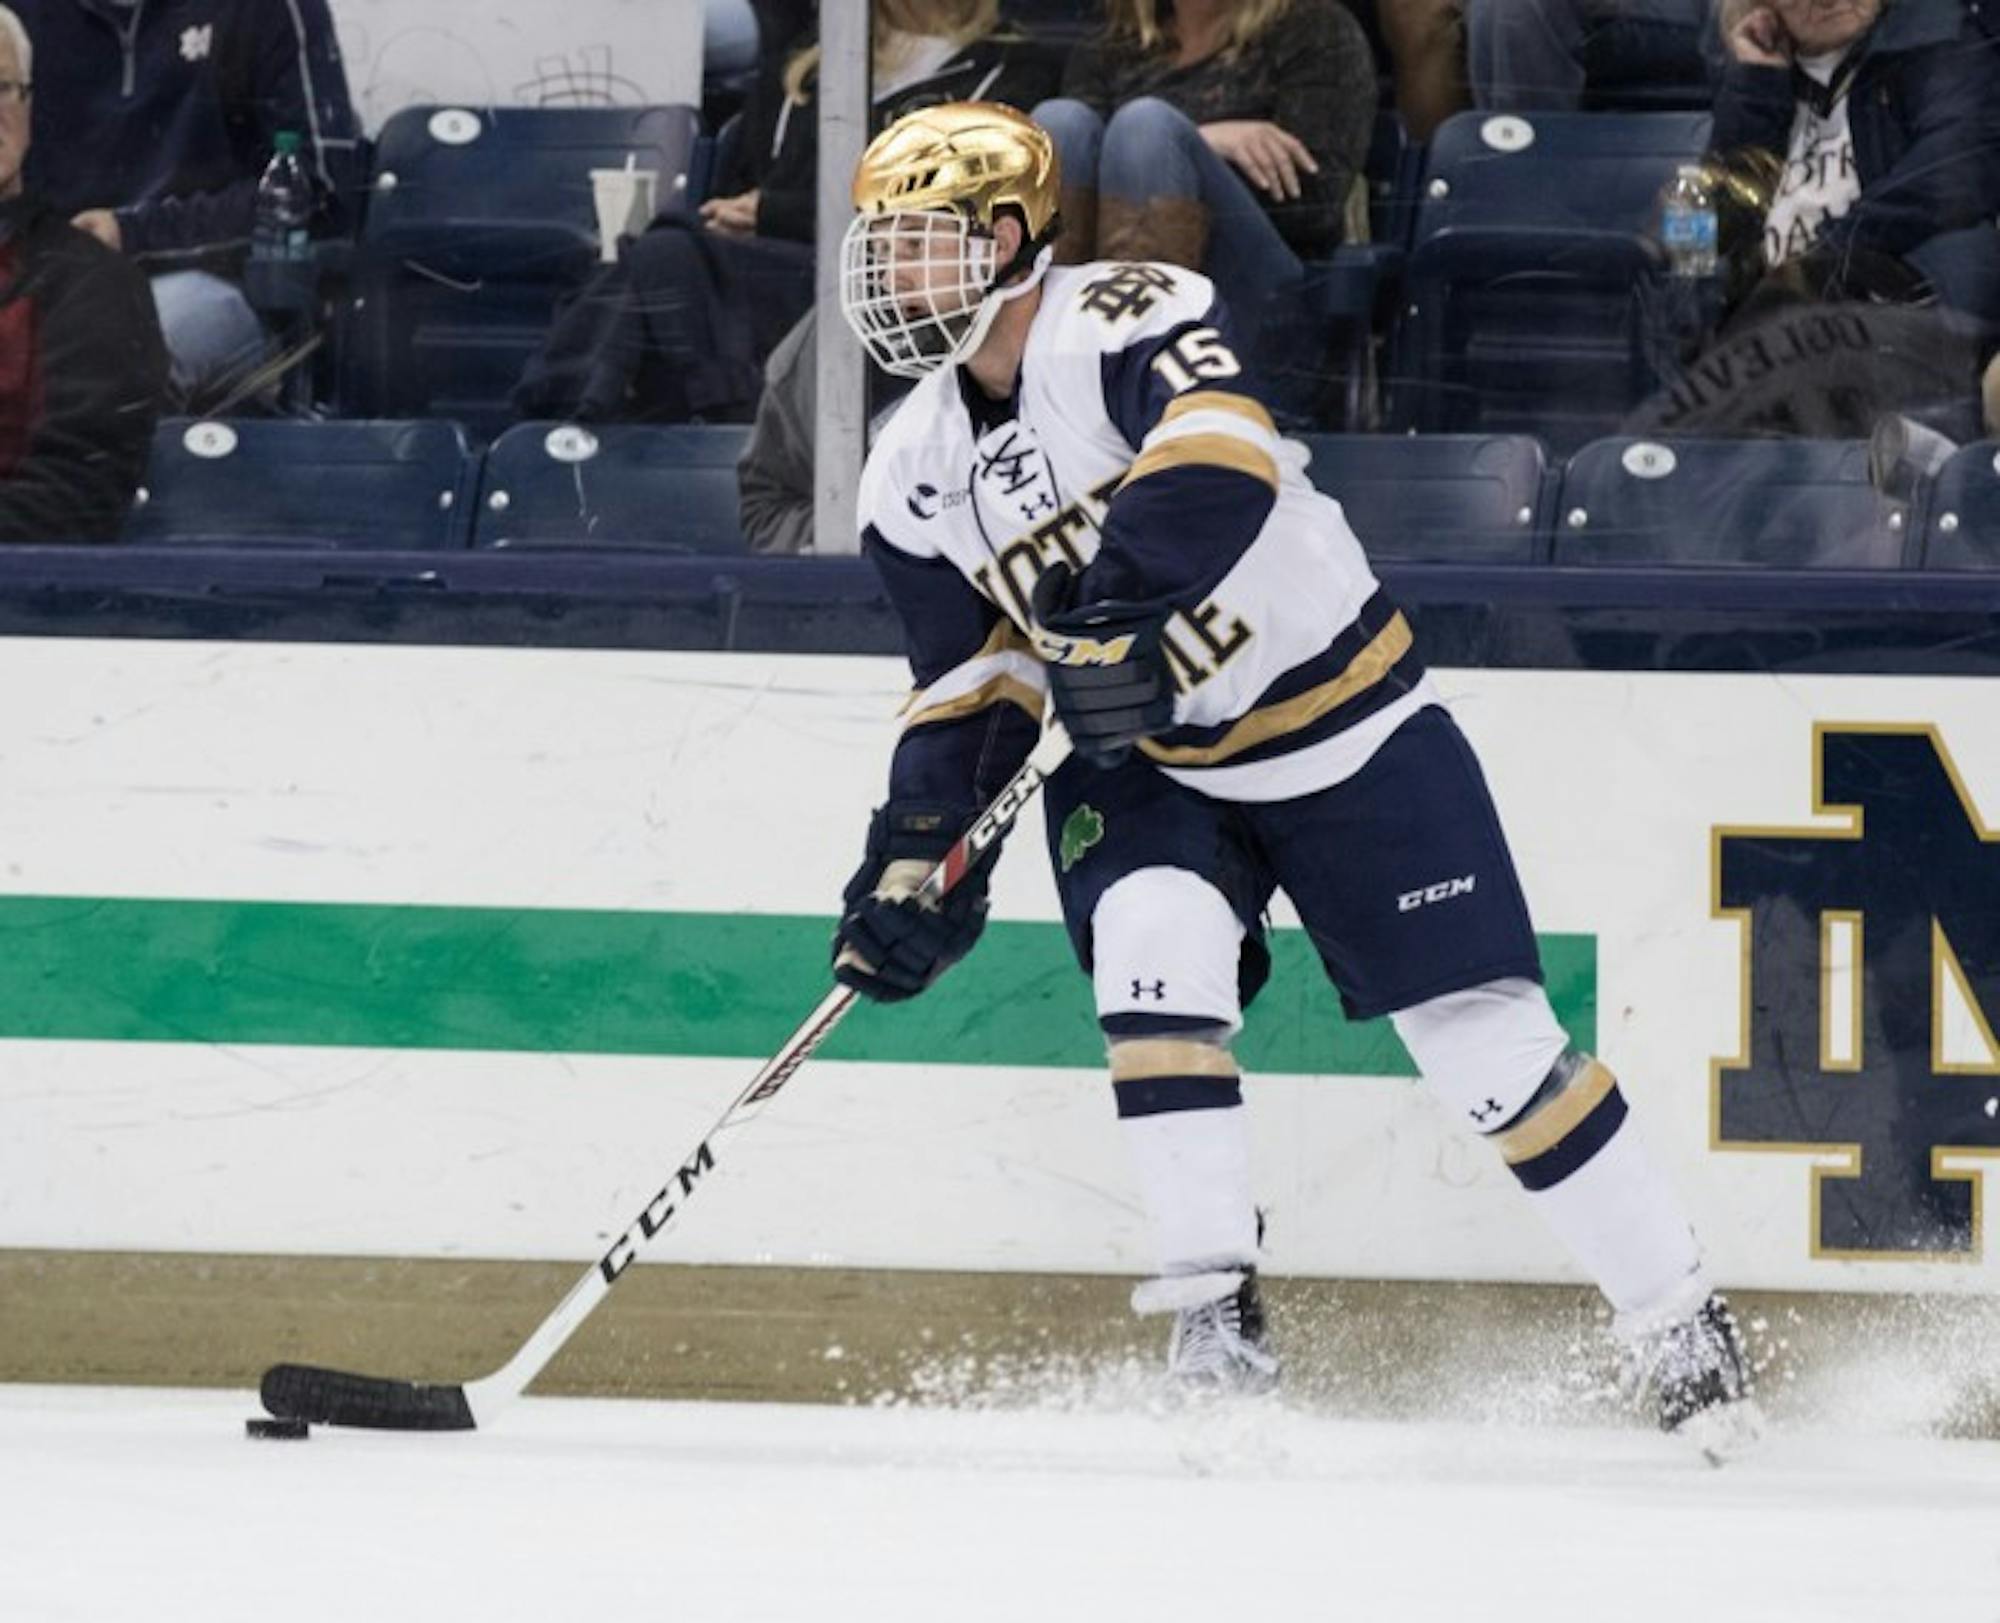 Irish sophomore forward Andrew Oglevie surveys the ice during Notre Dame’s 4-2 loss to UConn on Oct. 27 at Compton Family Ice Arena. Oglevie is second on the team in points scored this season with 15.